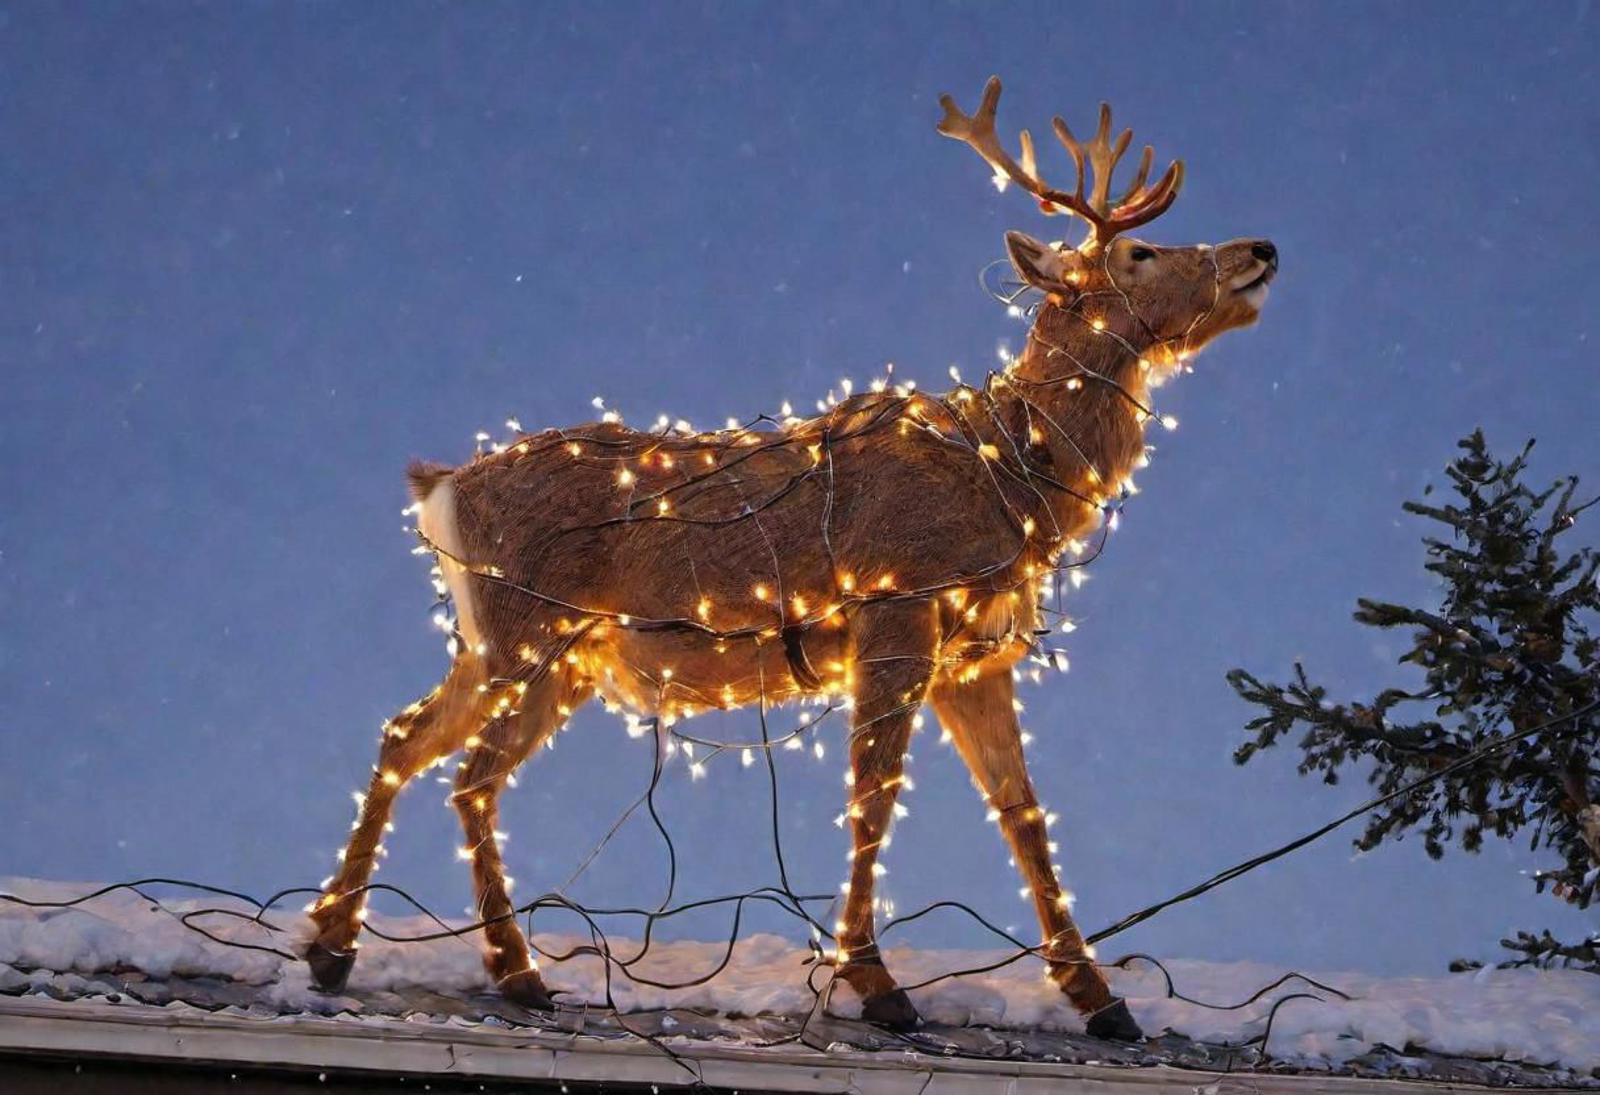 A deer wearing a string of lights on its horns.